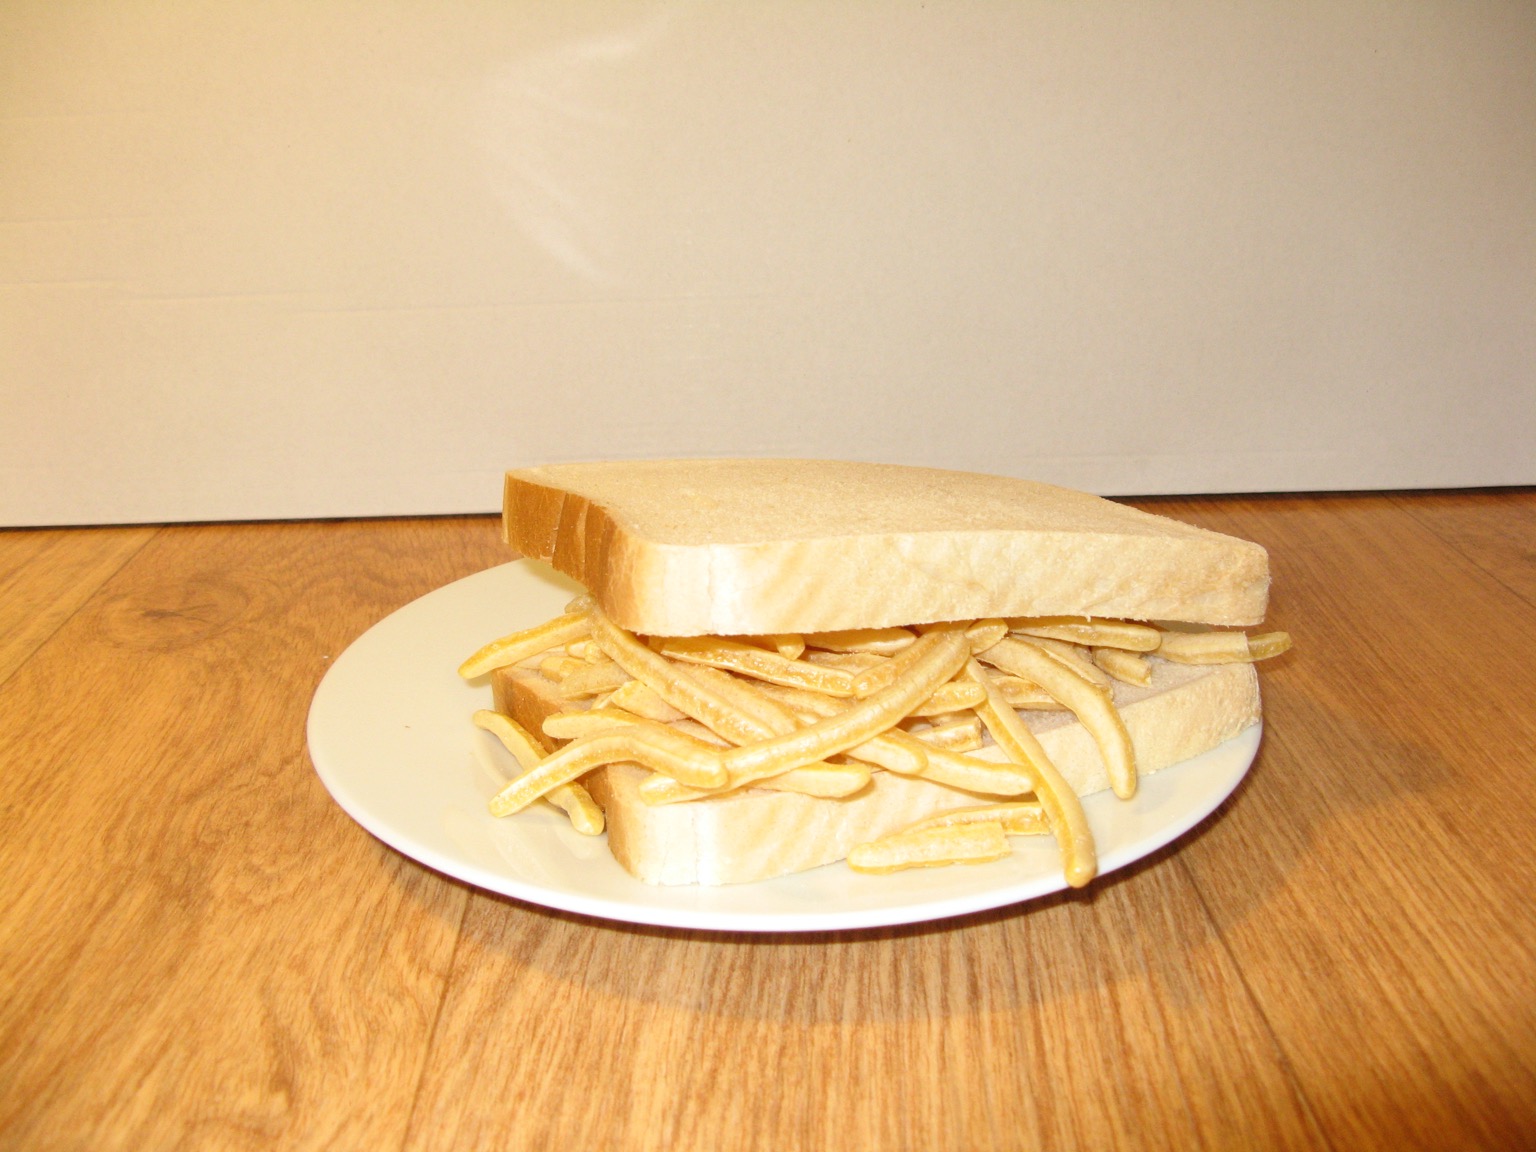 Sandwich containing French Fries snacks